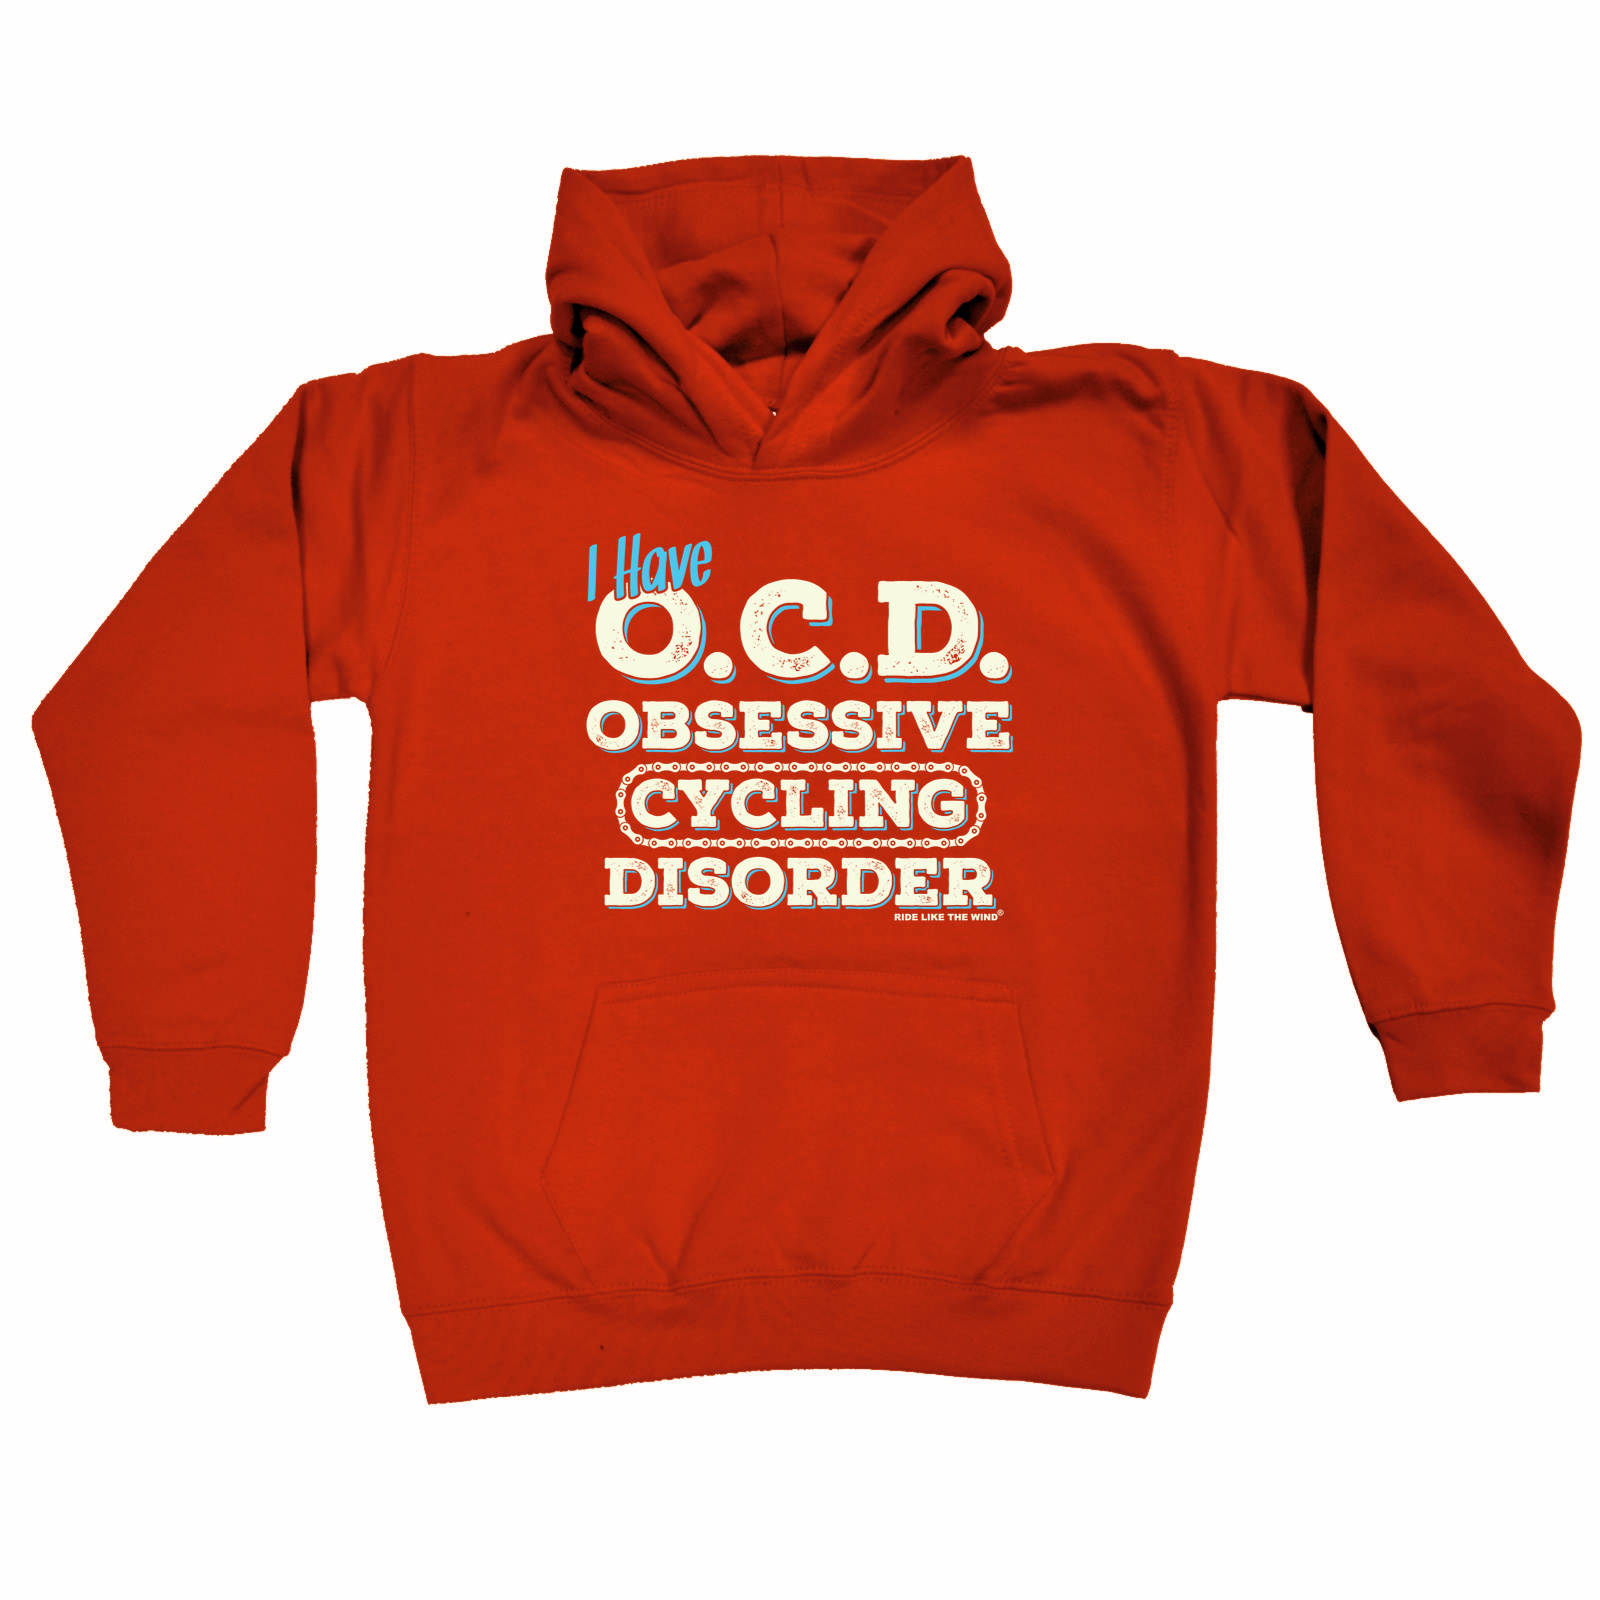 I Have Ocd Obsessive Cycling Disorder - Funny Novelty Kids Children Hoodie - Picture 1 of 1